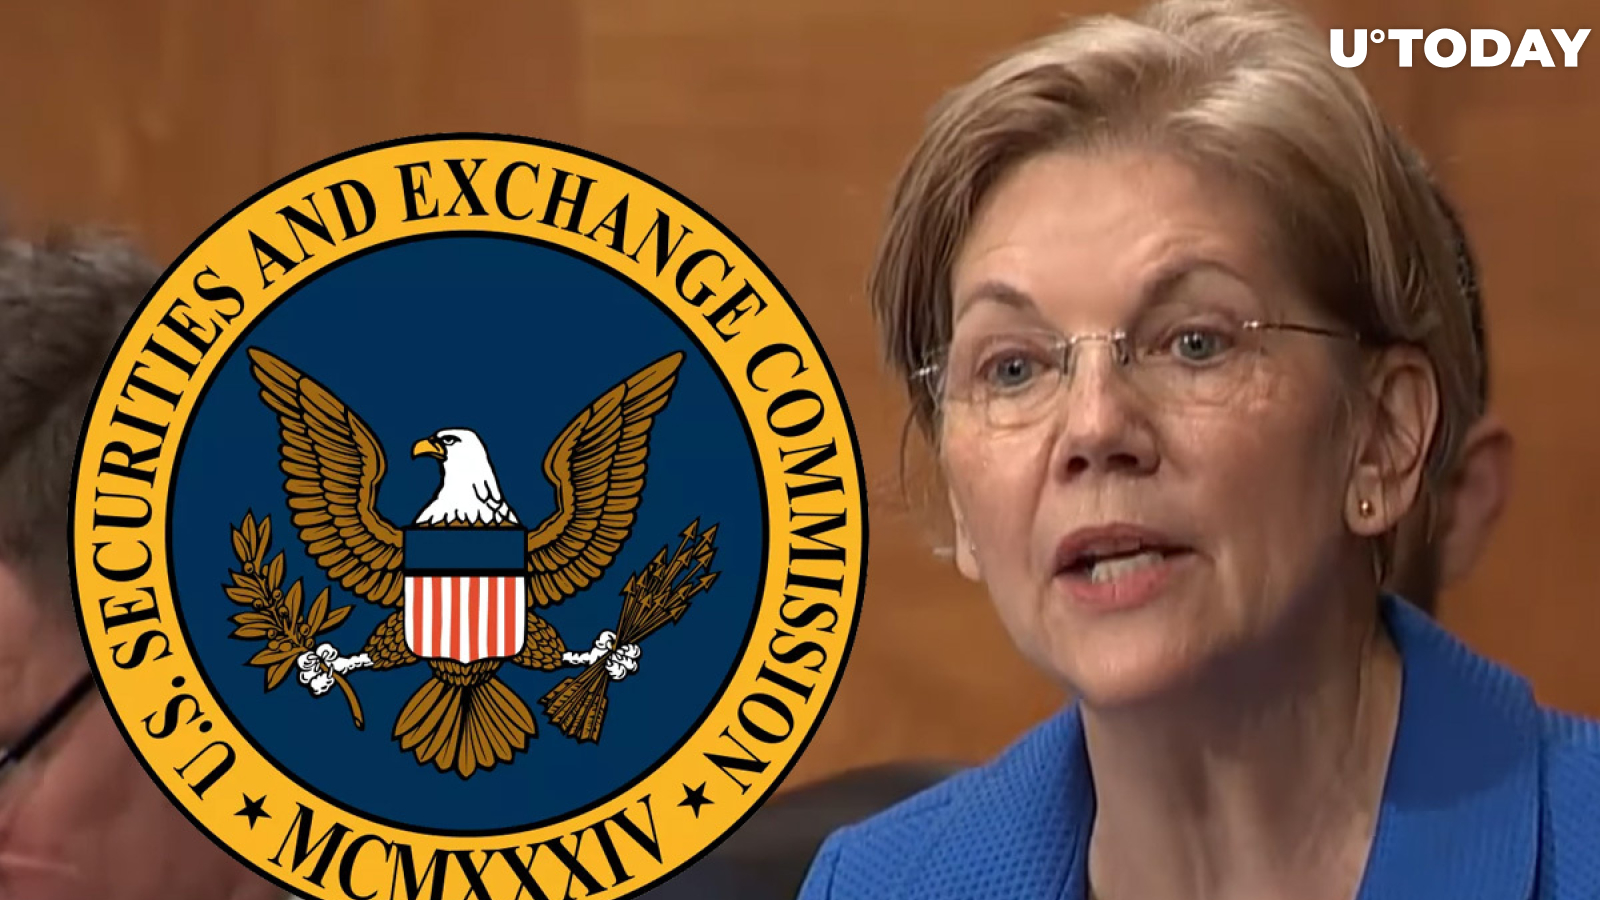 Highly Volatile Cryptocurrencies Pose Risks to Consumers and Financial Markets, Senator Warren Tells SEC